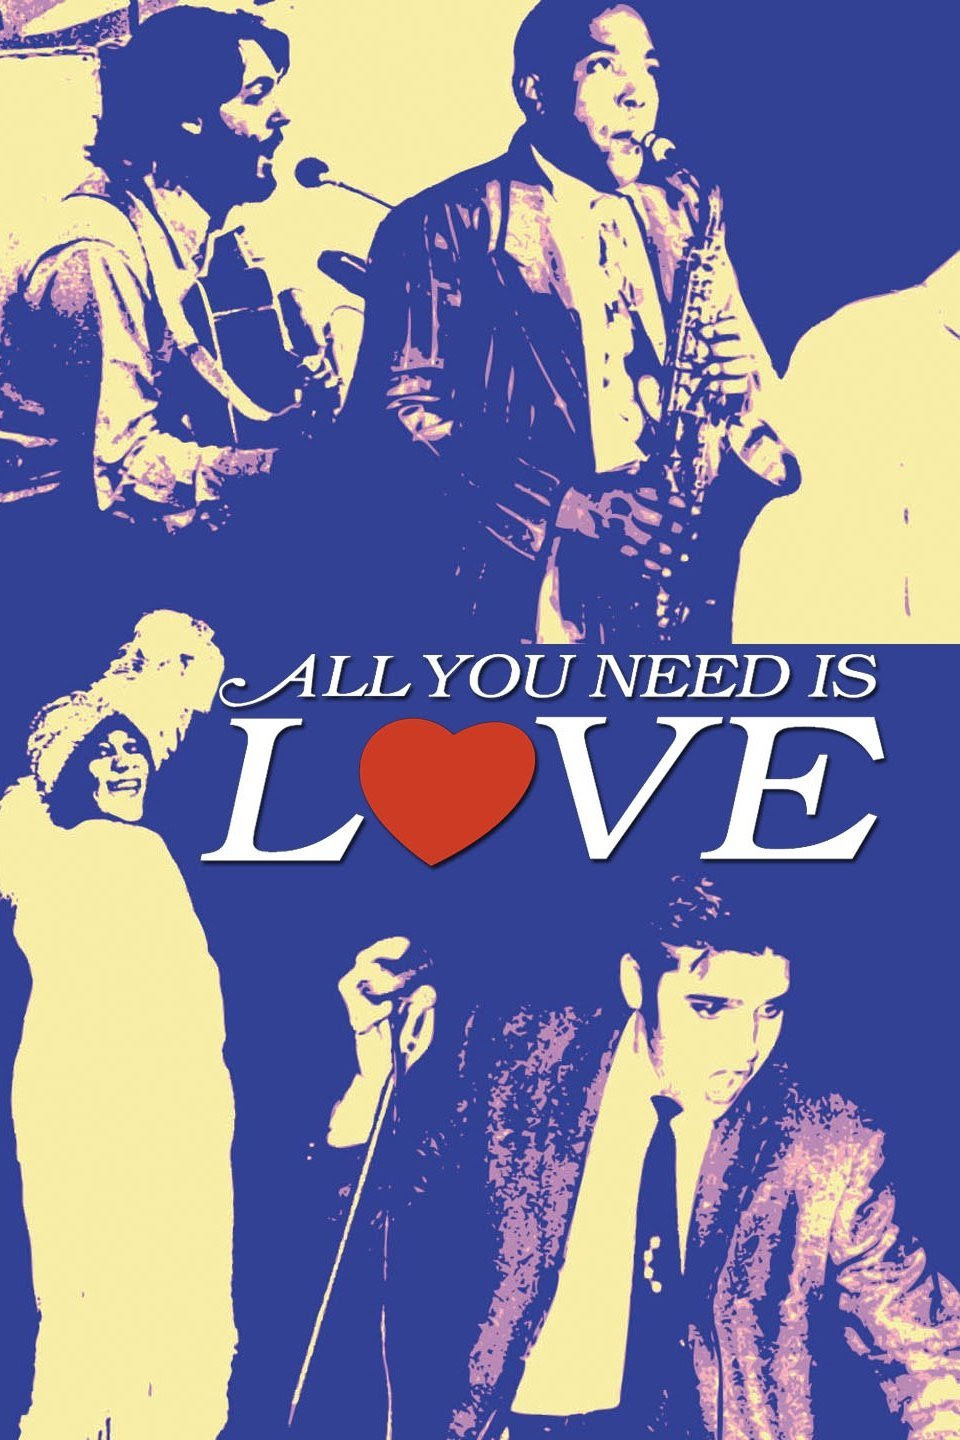 All You Need Is Love. The Beatles